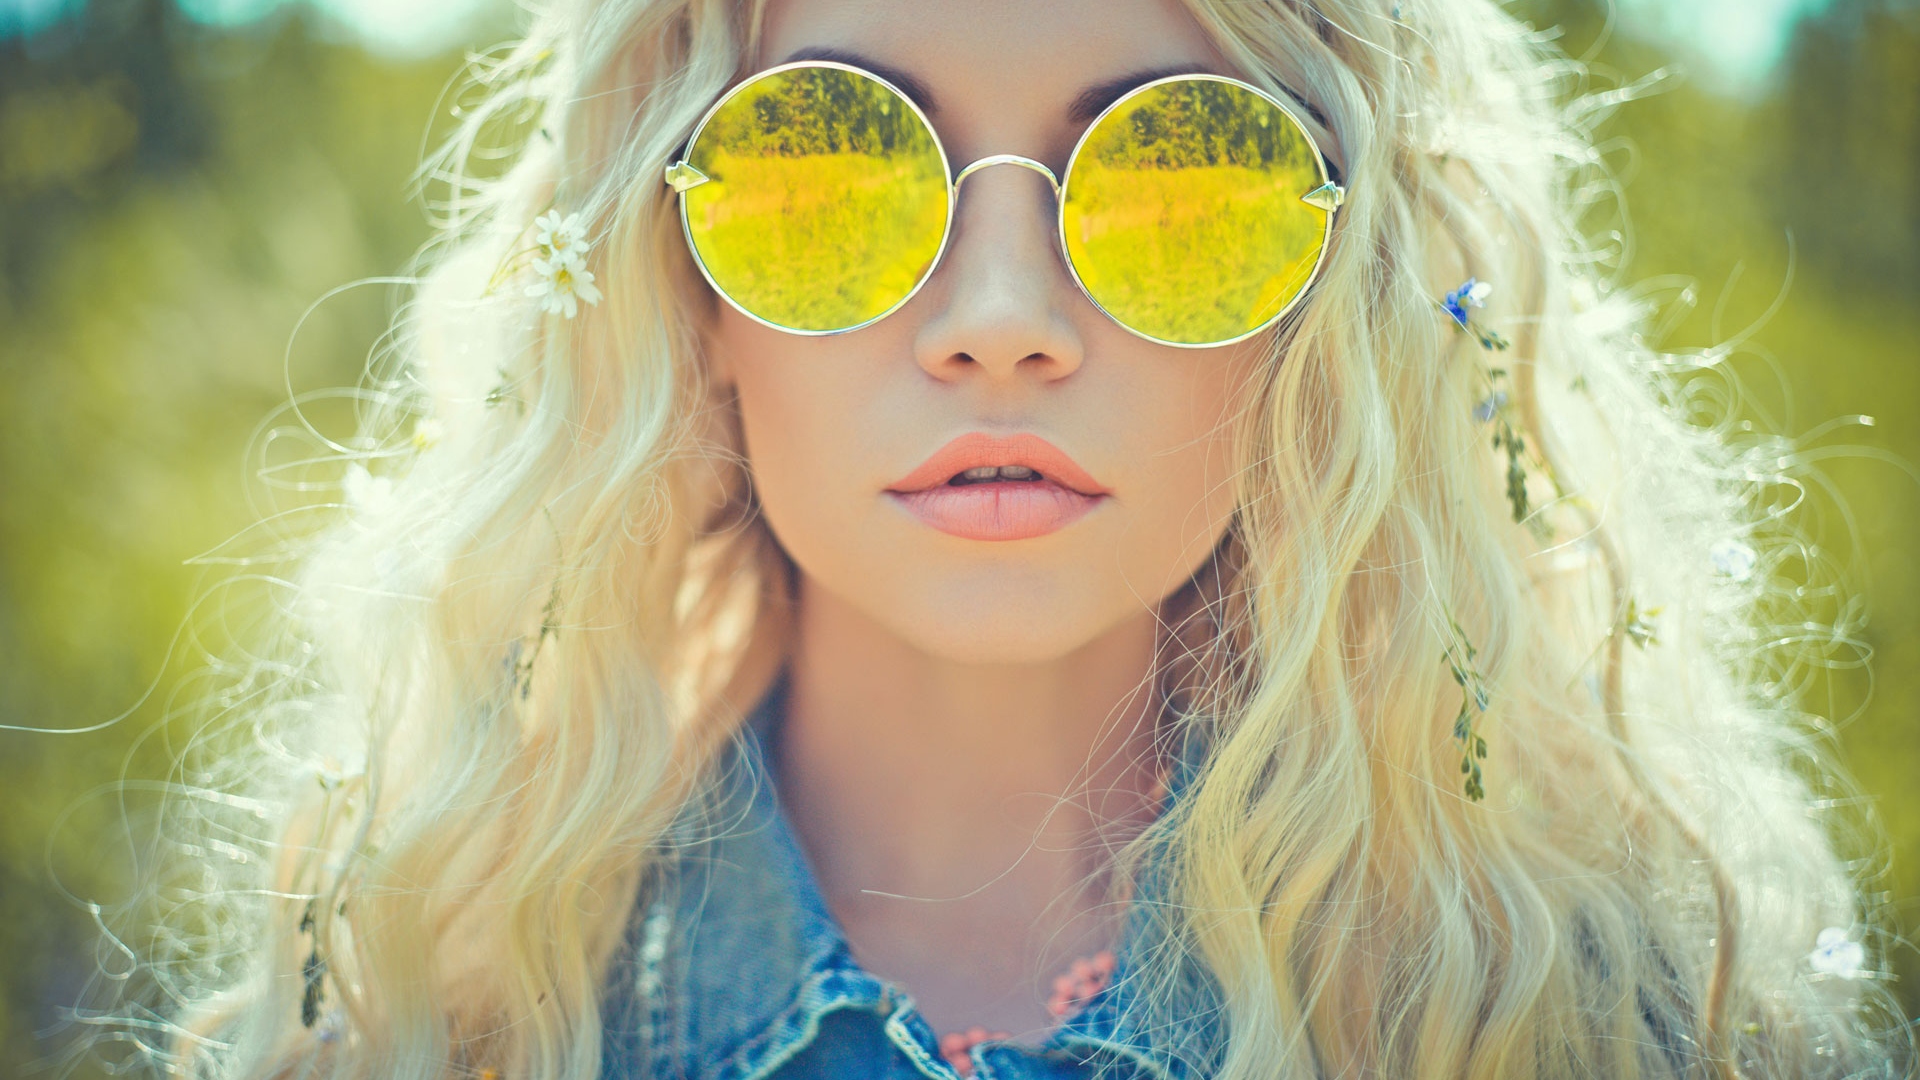 All the rage: sunglasses with a mirror coating